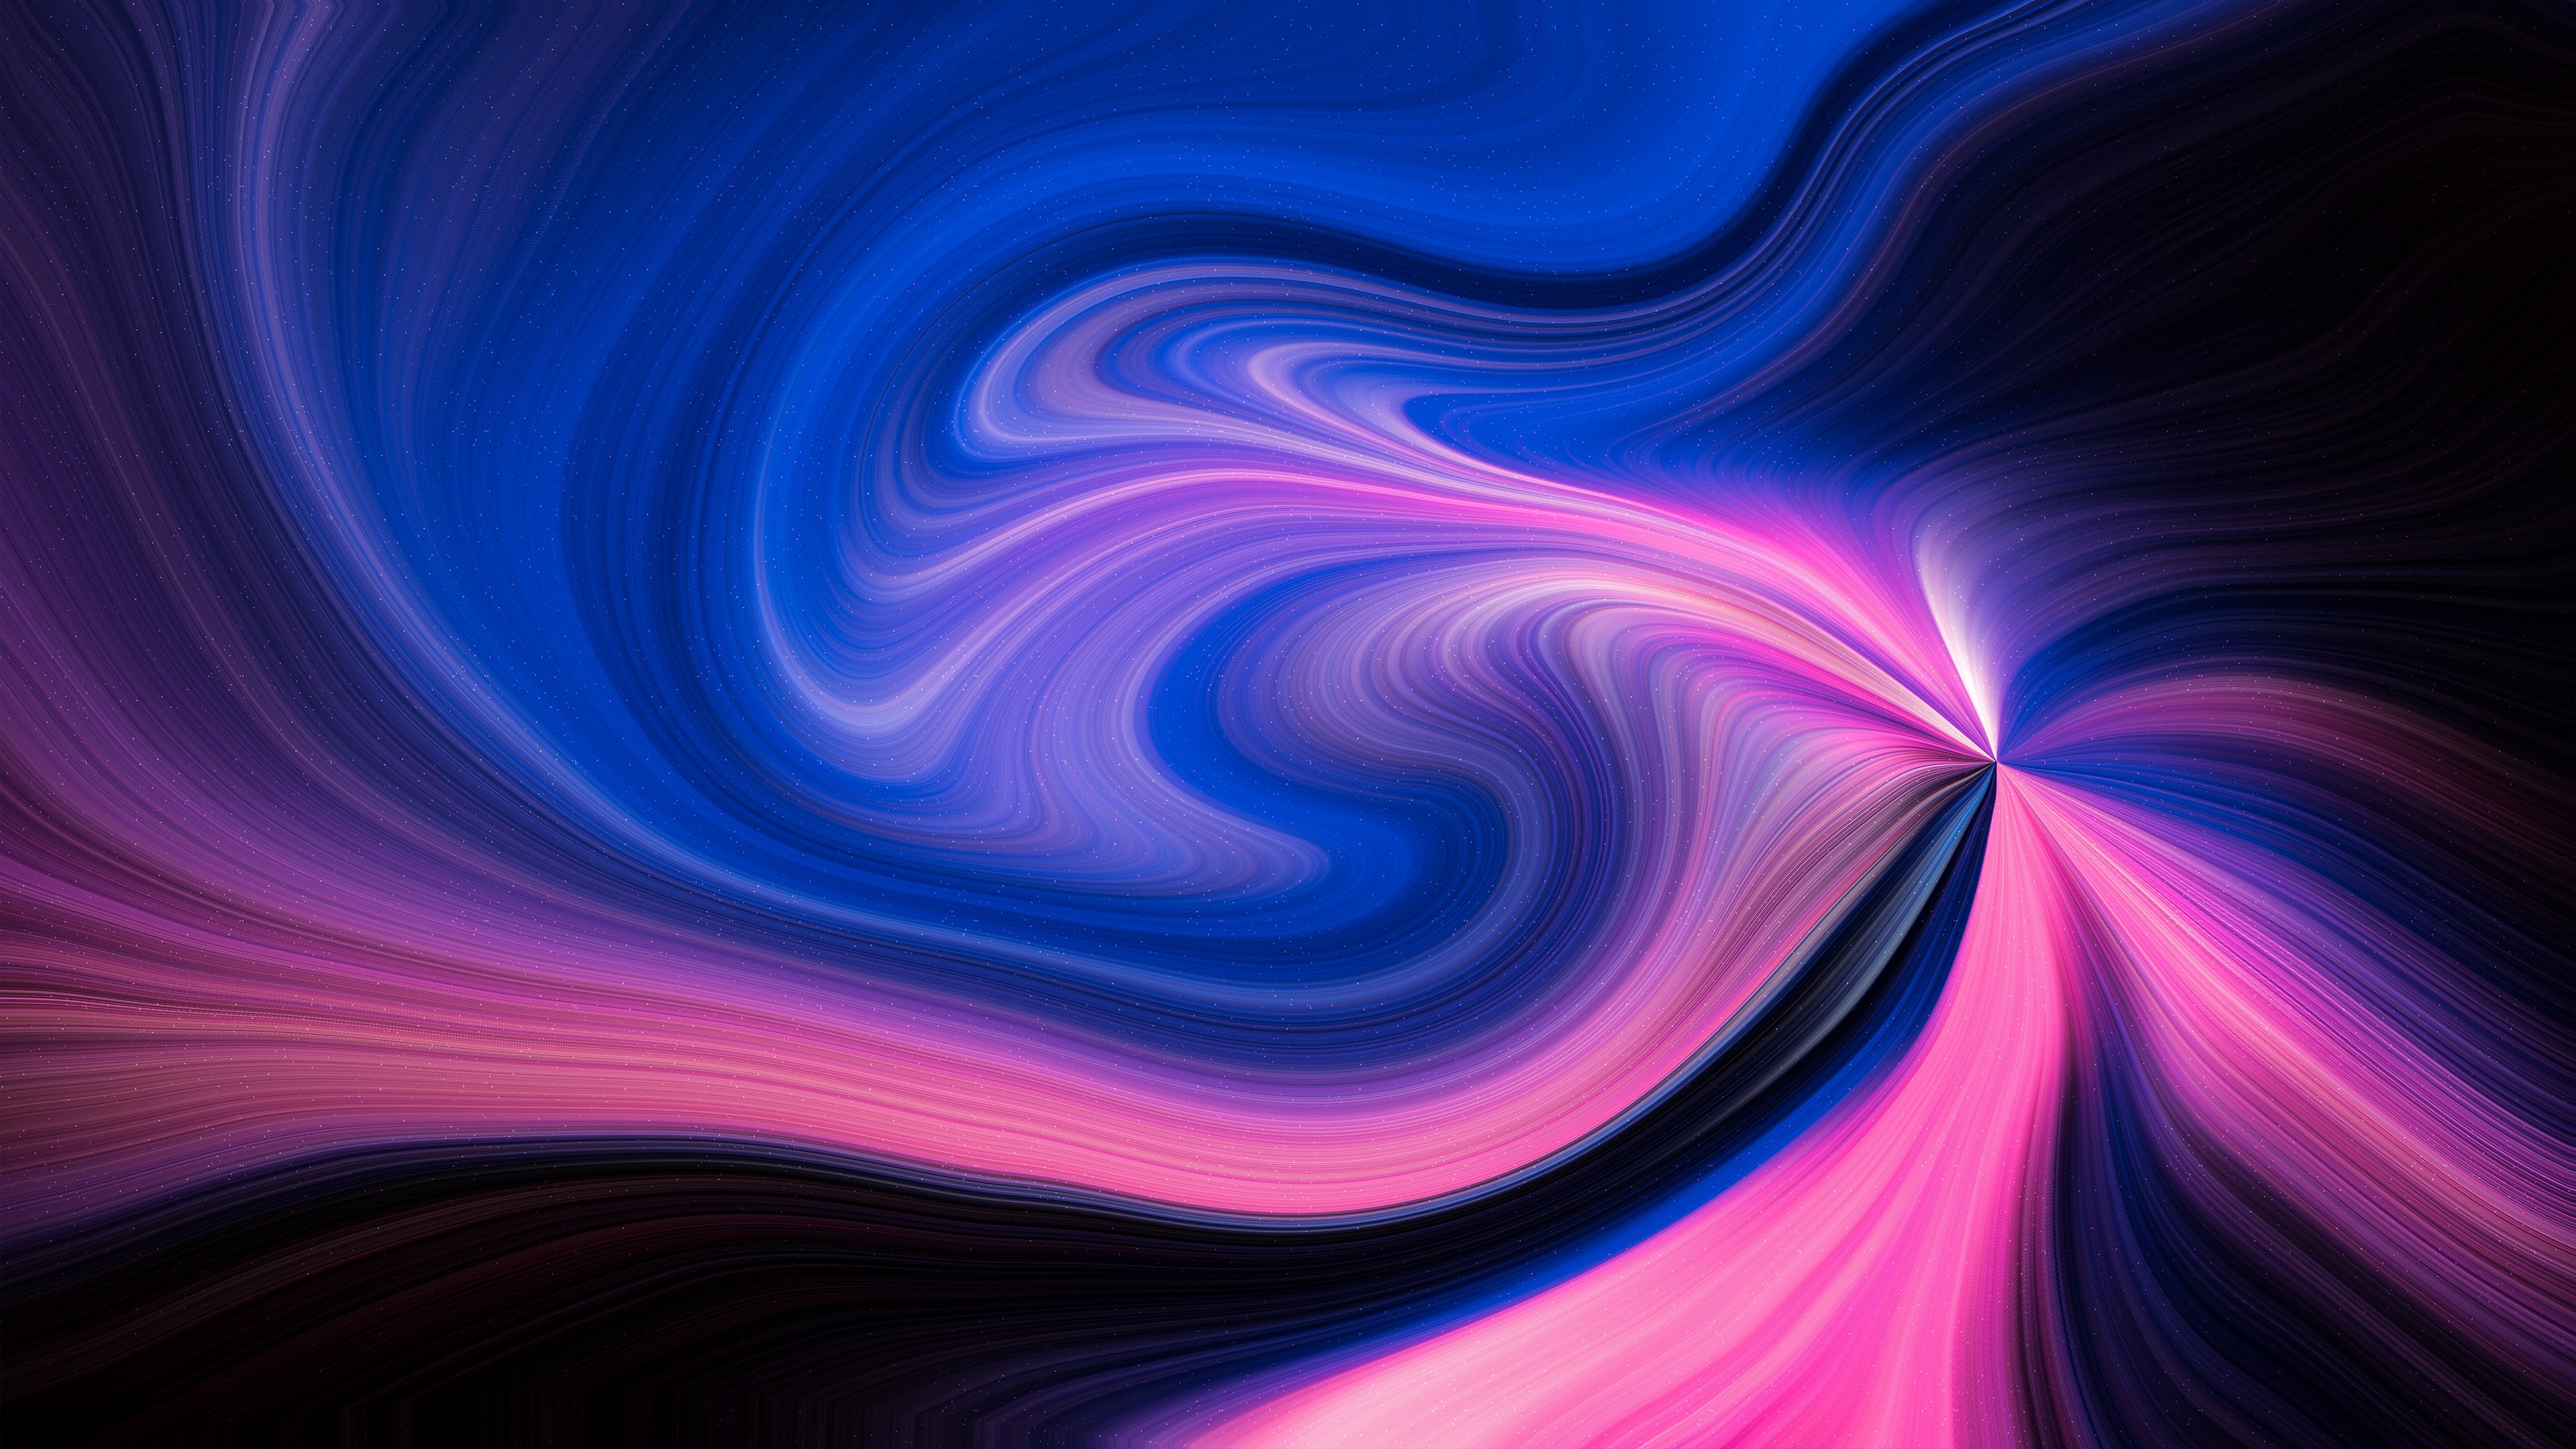 Wallpaper Swirls of pink and blue colors